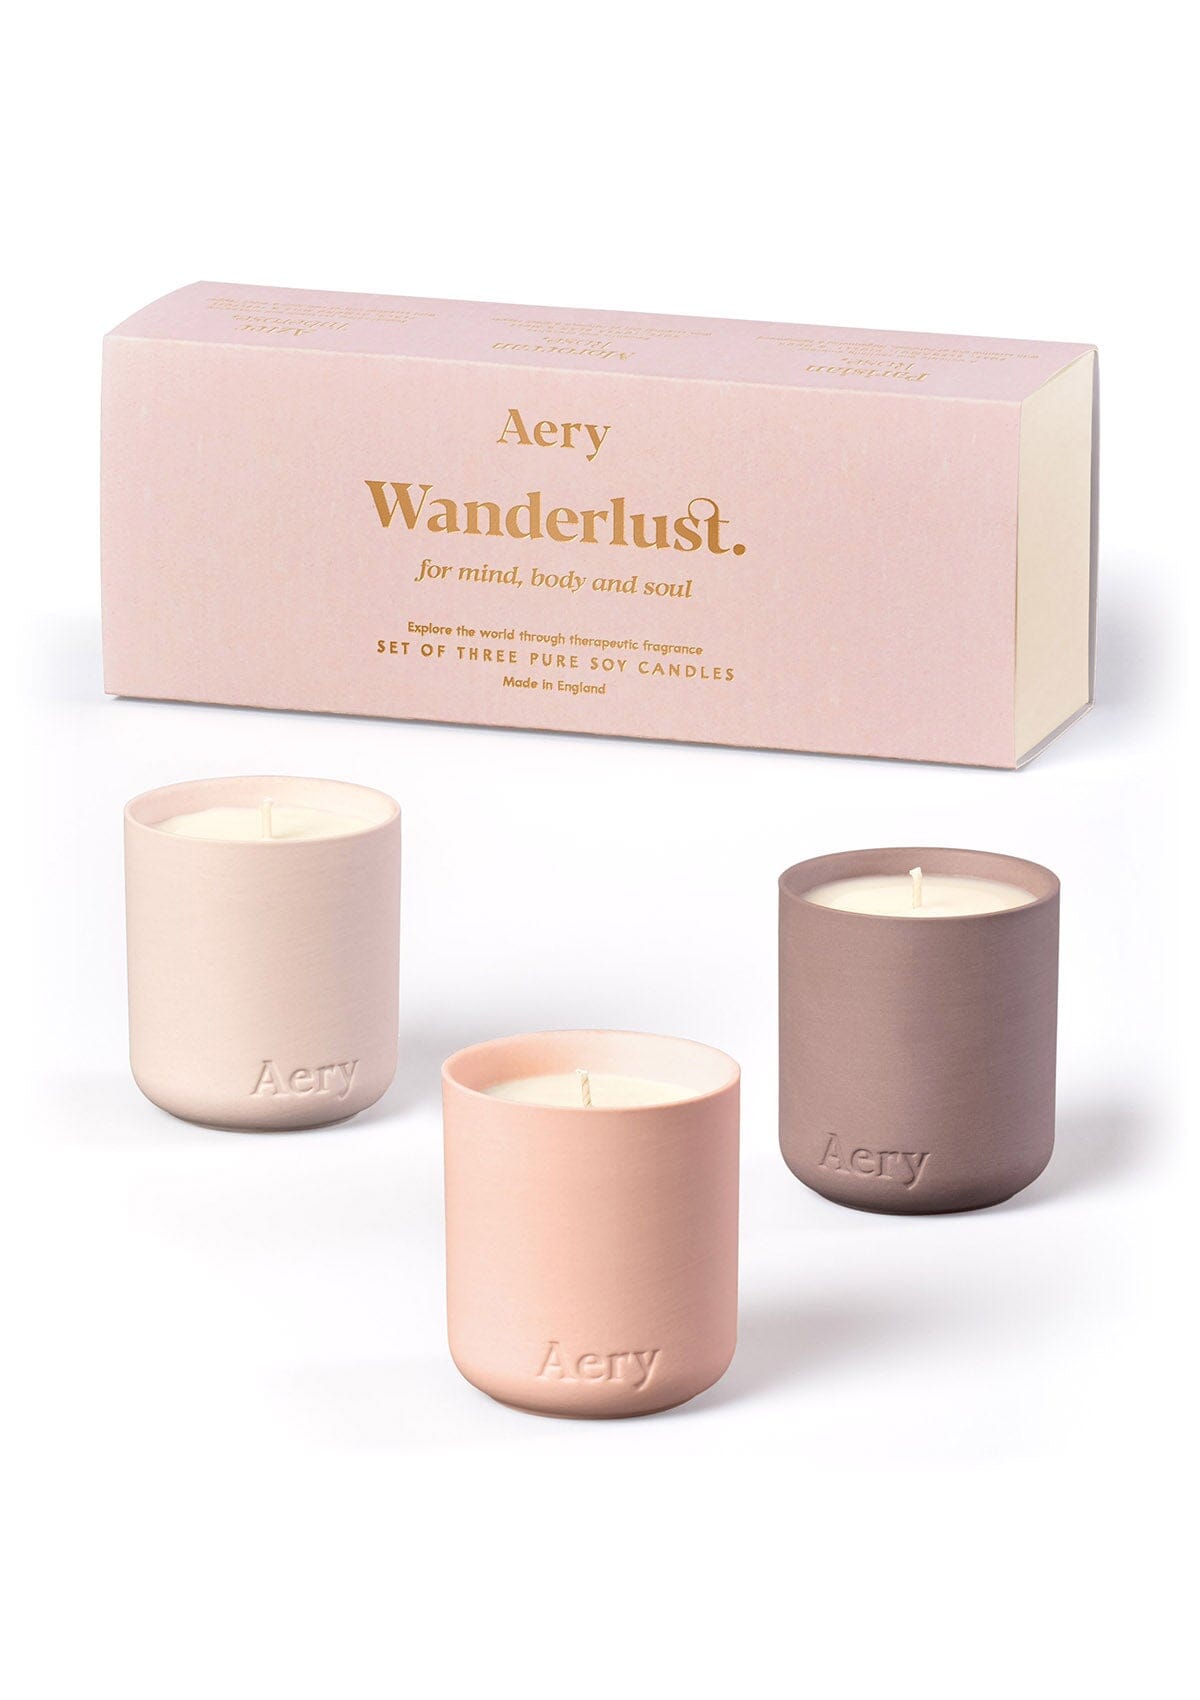 Blush Wanderlust candle set of three by Aery displayed next to product  packaging on white background 